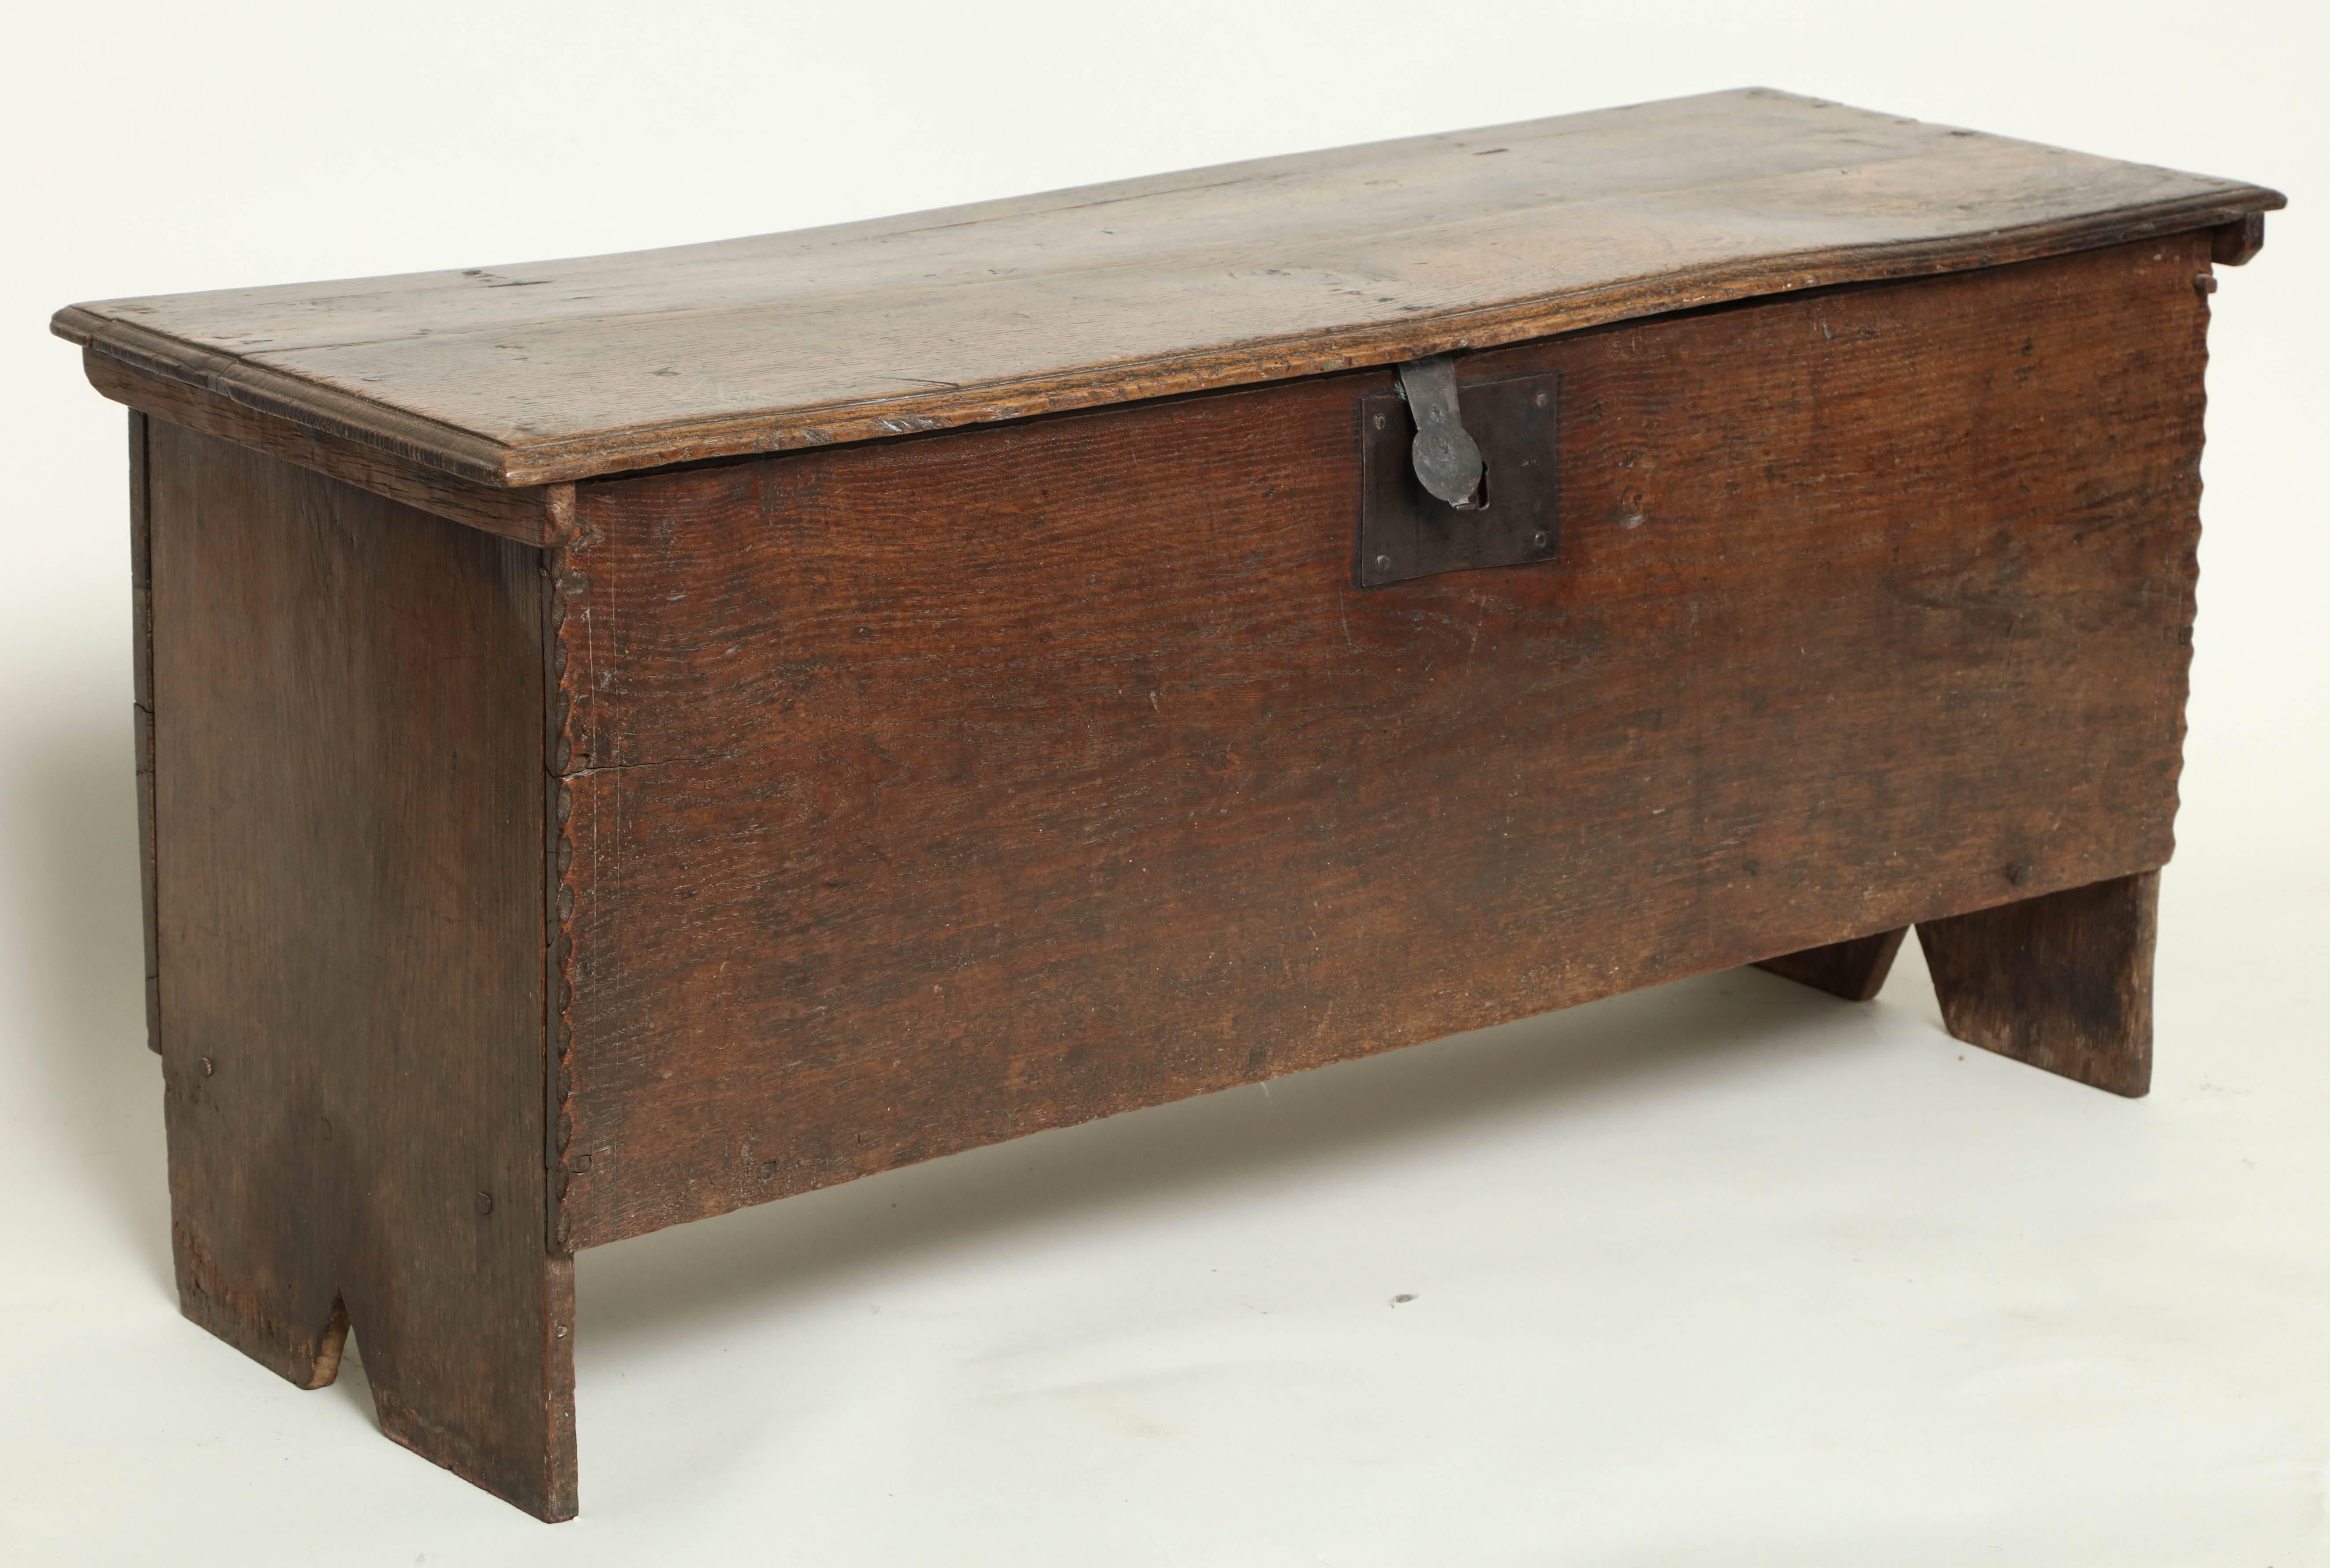 Good early 18th century oak six plank coffer with molded top over boot jack ends, the front with chip carved edge and original wrought iron escutcheon, the whole with rich, faded surface and patina.